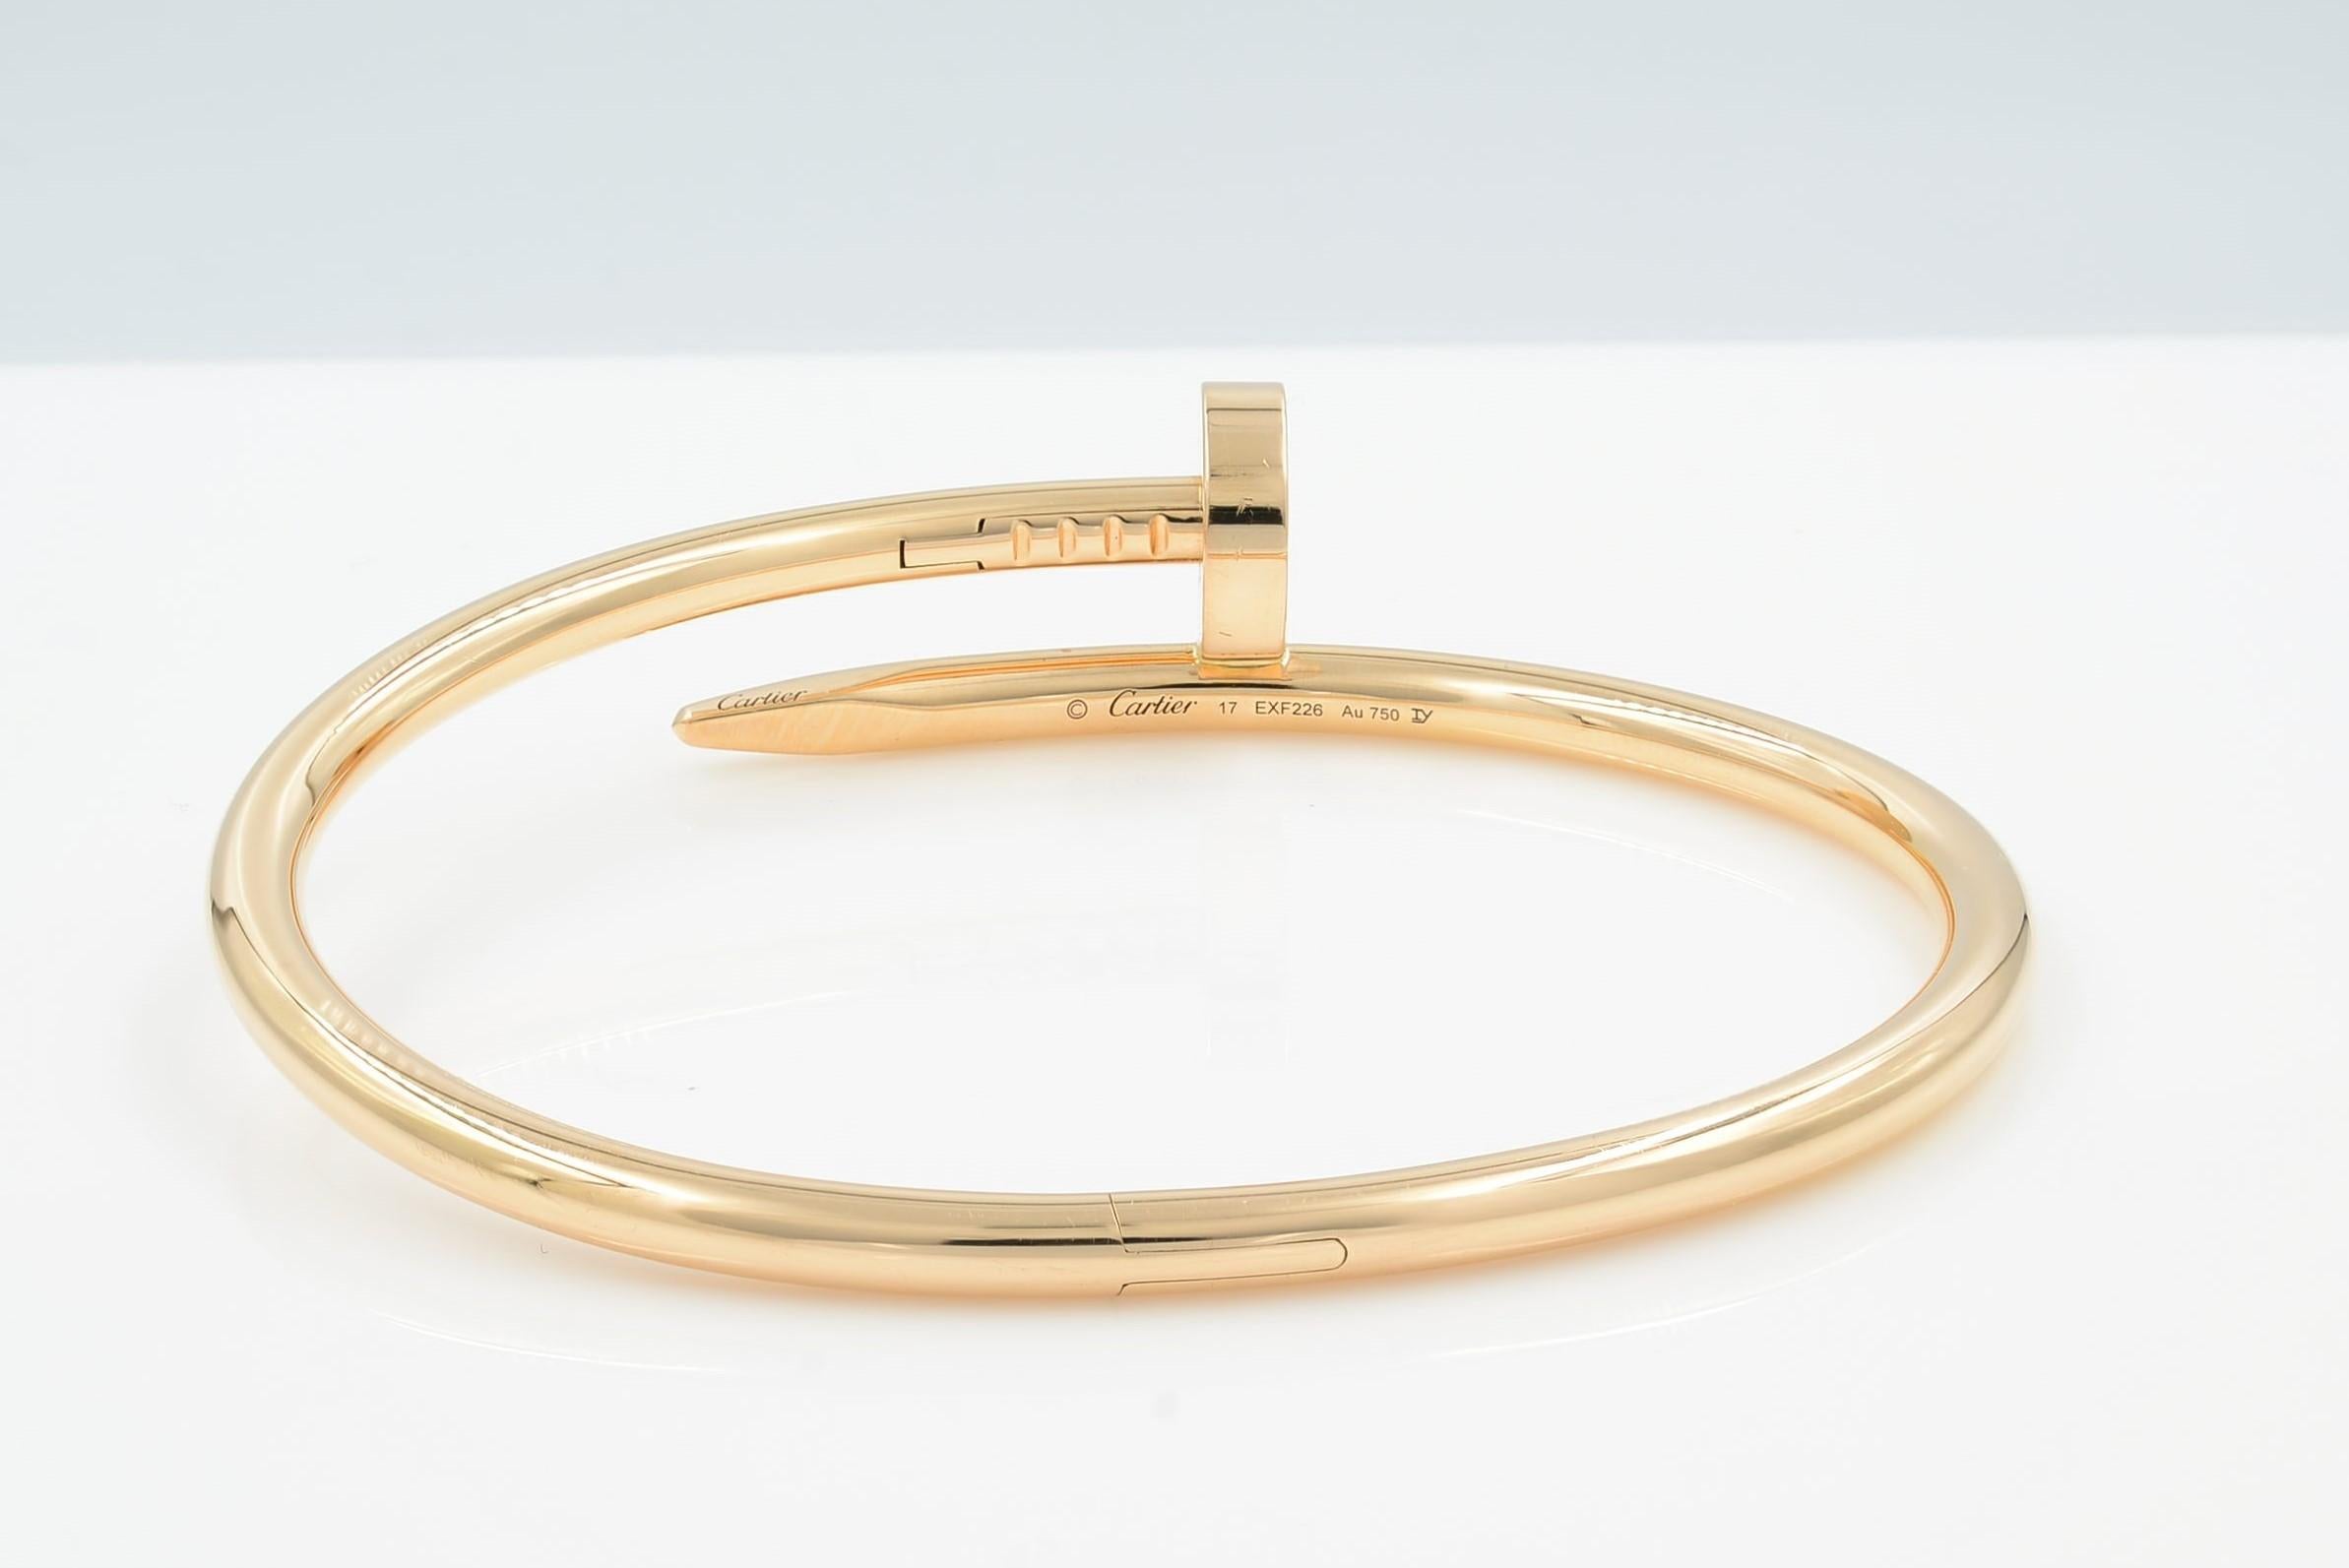 JUSTE UN CLOU BRACELET
Rose gold
Size 17

An unhindered transformation with a remarkable strength. Designed in the 1970s during the creative frenzy in New York, Juste un Clou is the expression of a rebellious nature and the reflection of